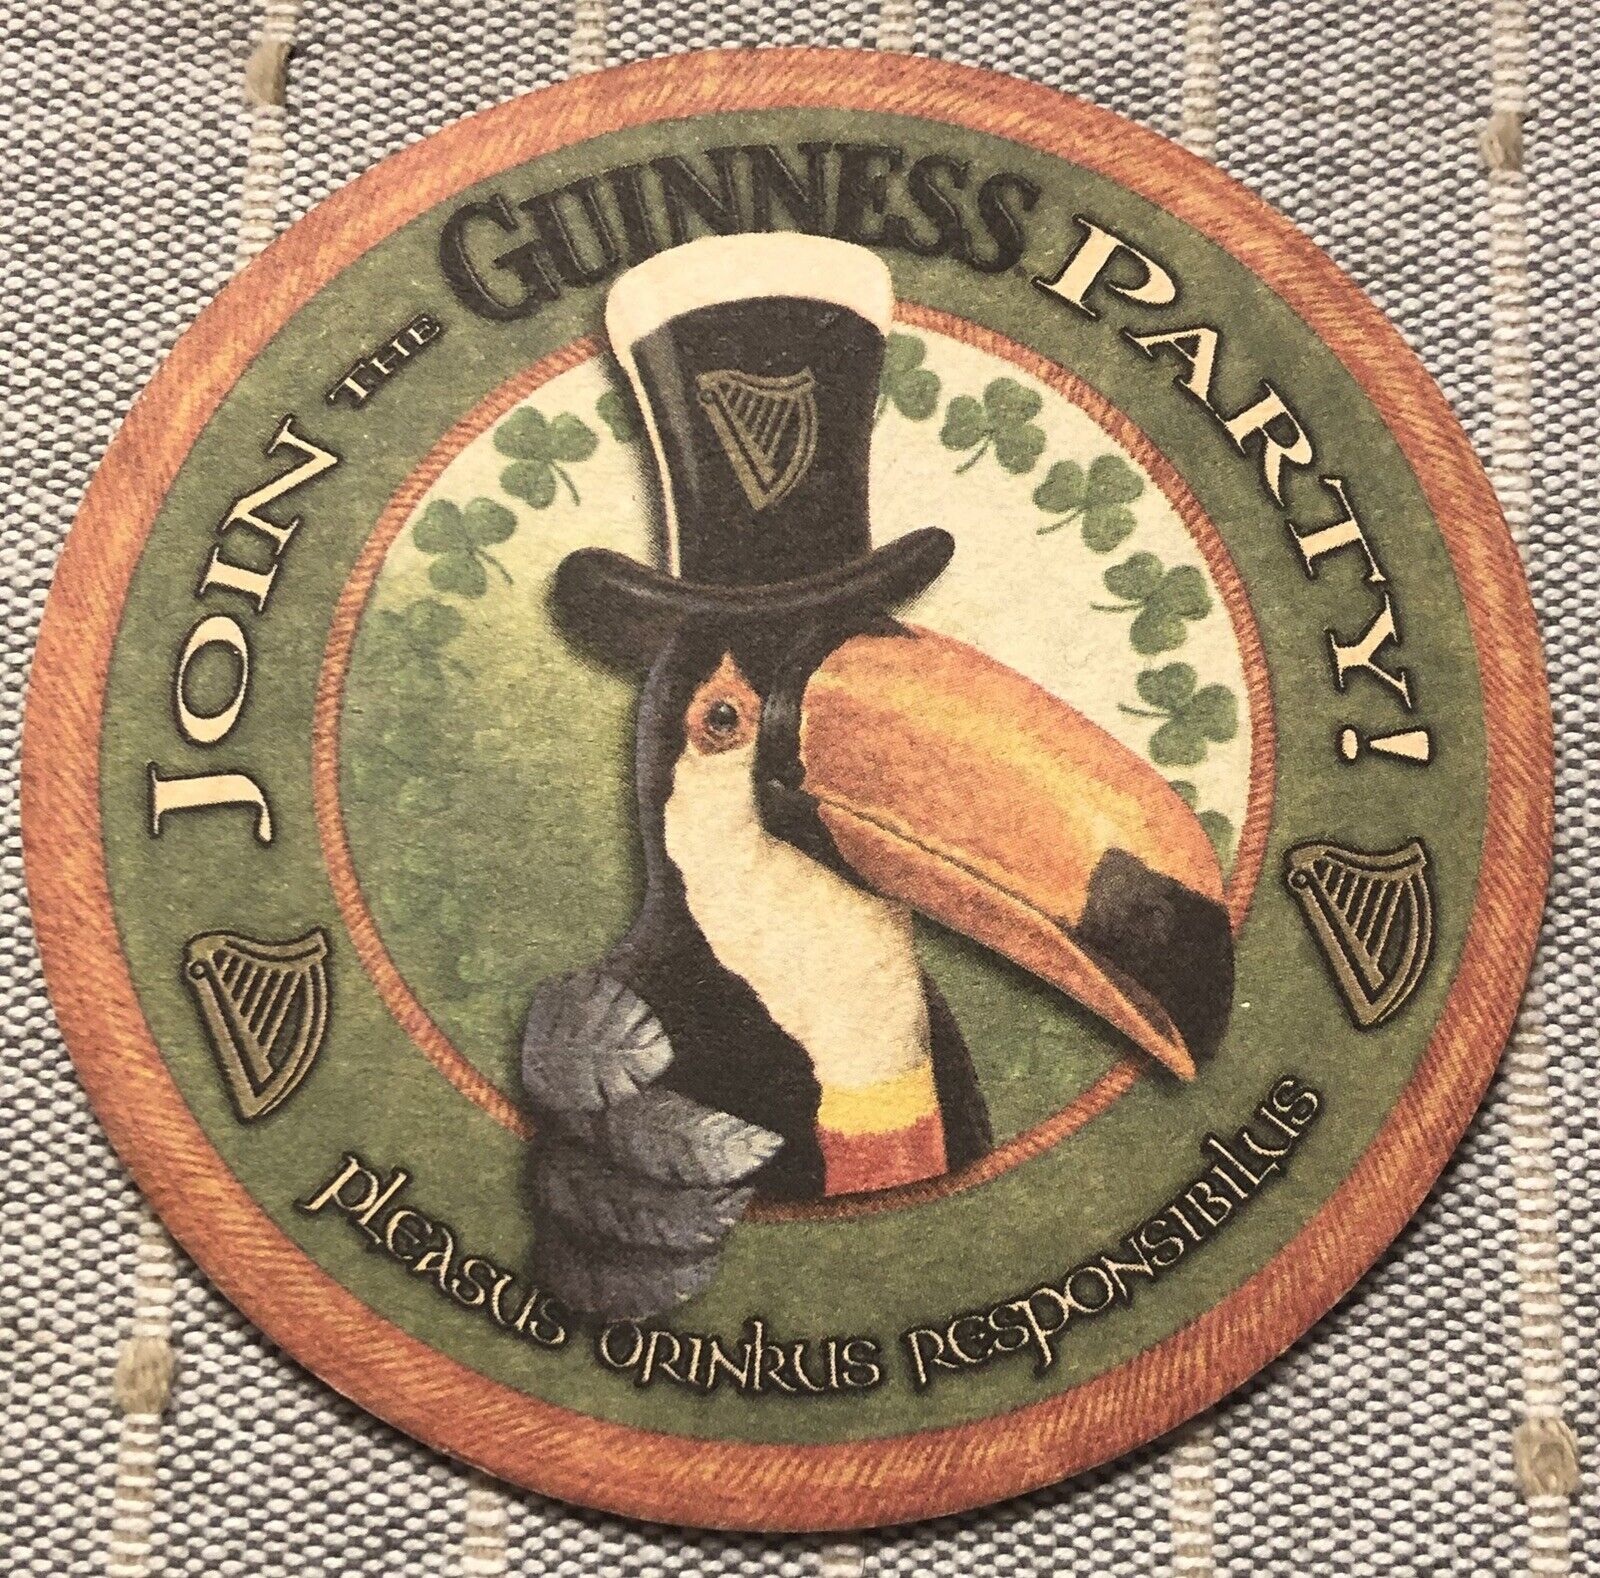 Lot of 5 “Join The Guinness Party”Toucan Double-sided Paper Coasters 2001 - New